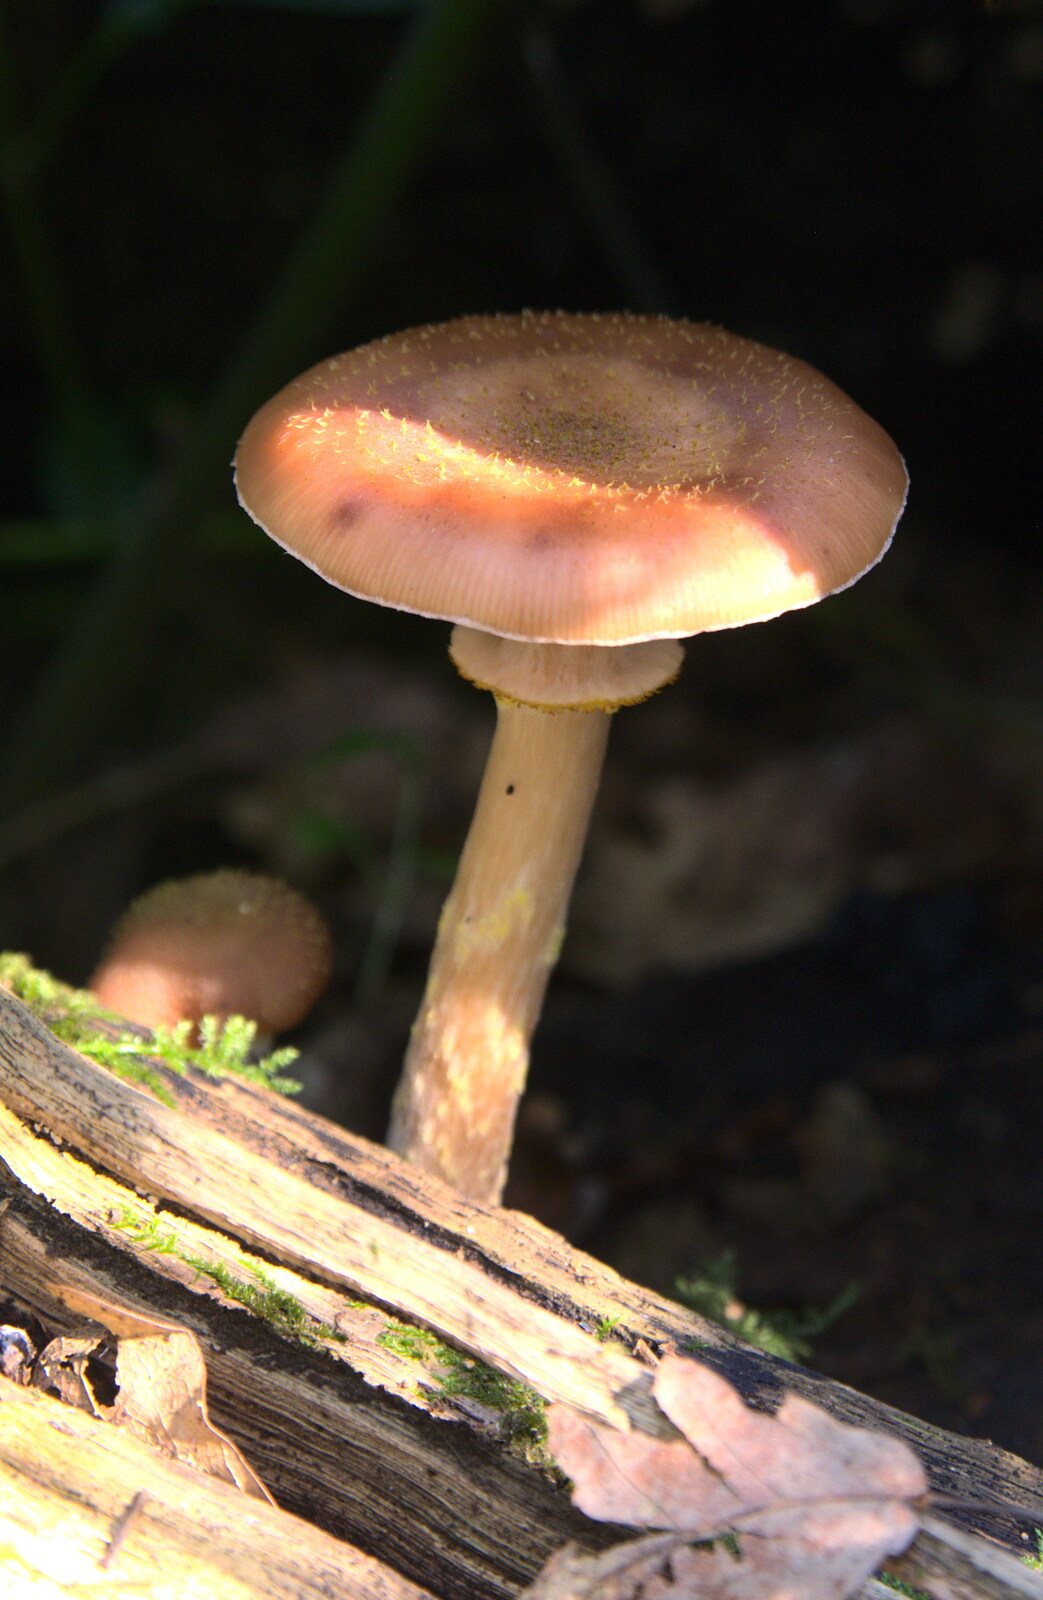 Another fungus from The Mushrooms of Thornham Estate, Thornham, Suffolk - 4th October 2015